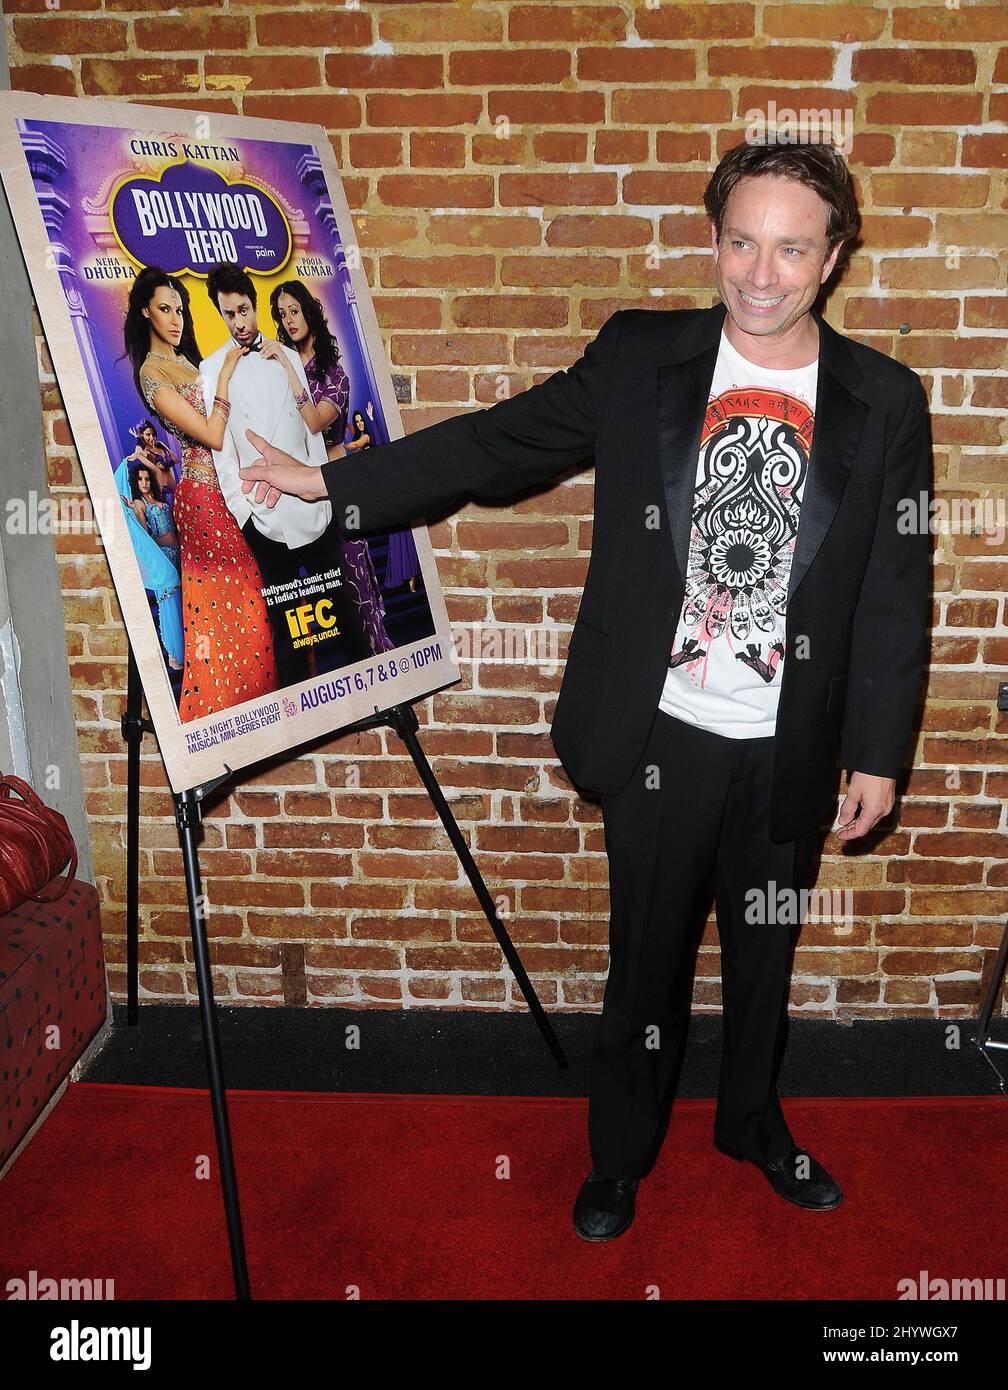 Chris Kattan at the 'Bollywood Hero' IFC's Los Angeles Premiere held at Cinespace in Hollywood, California. Stock Photo